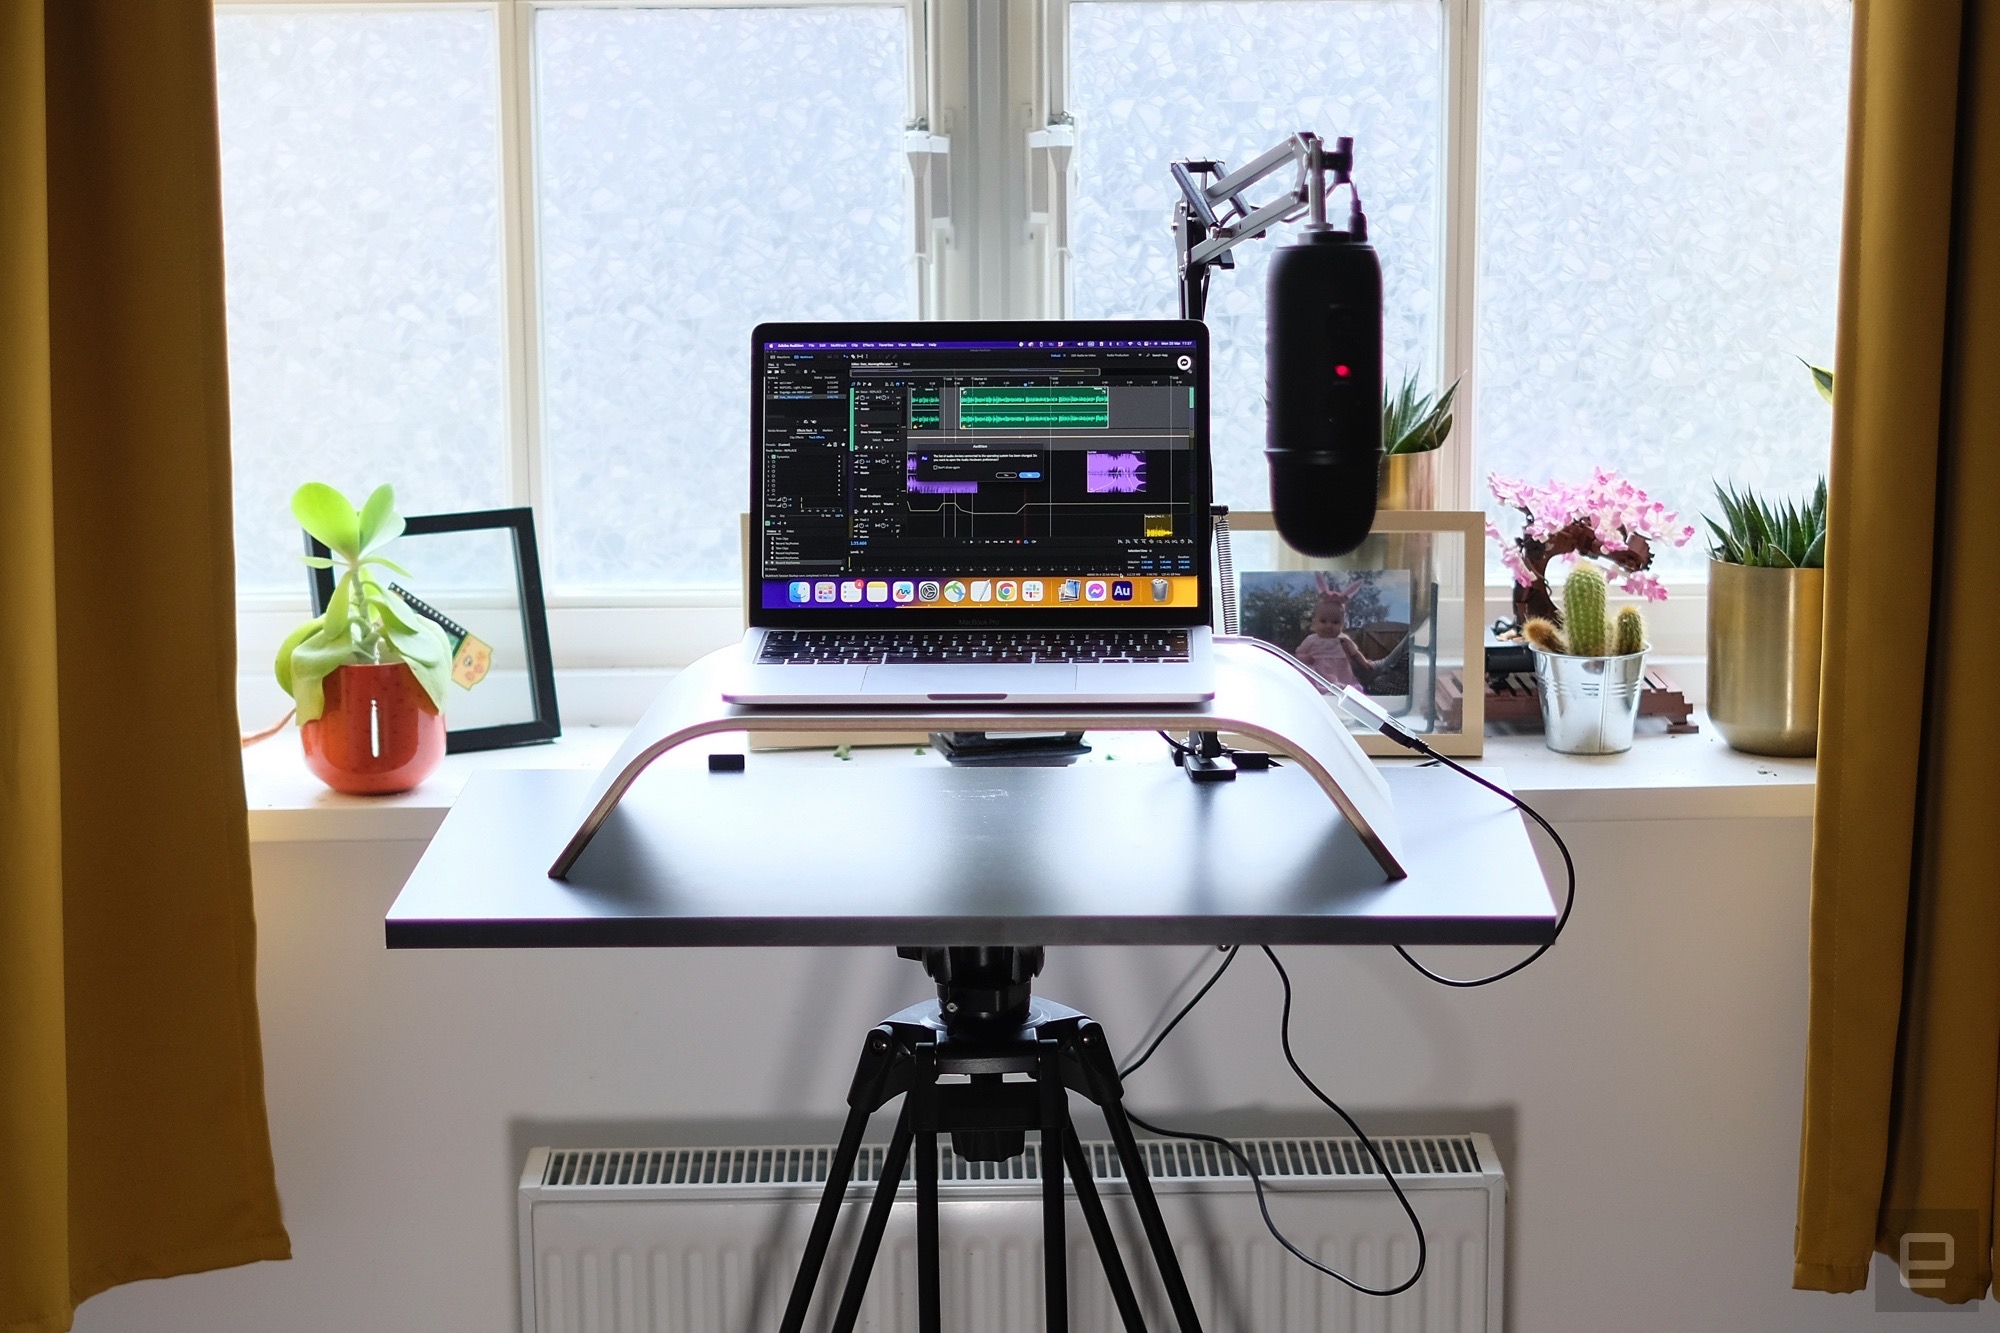 The Tripod Desk Pro is a portable standing desk that upgraded my WFH setup | DeviceDaily.com